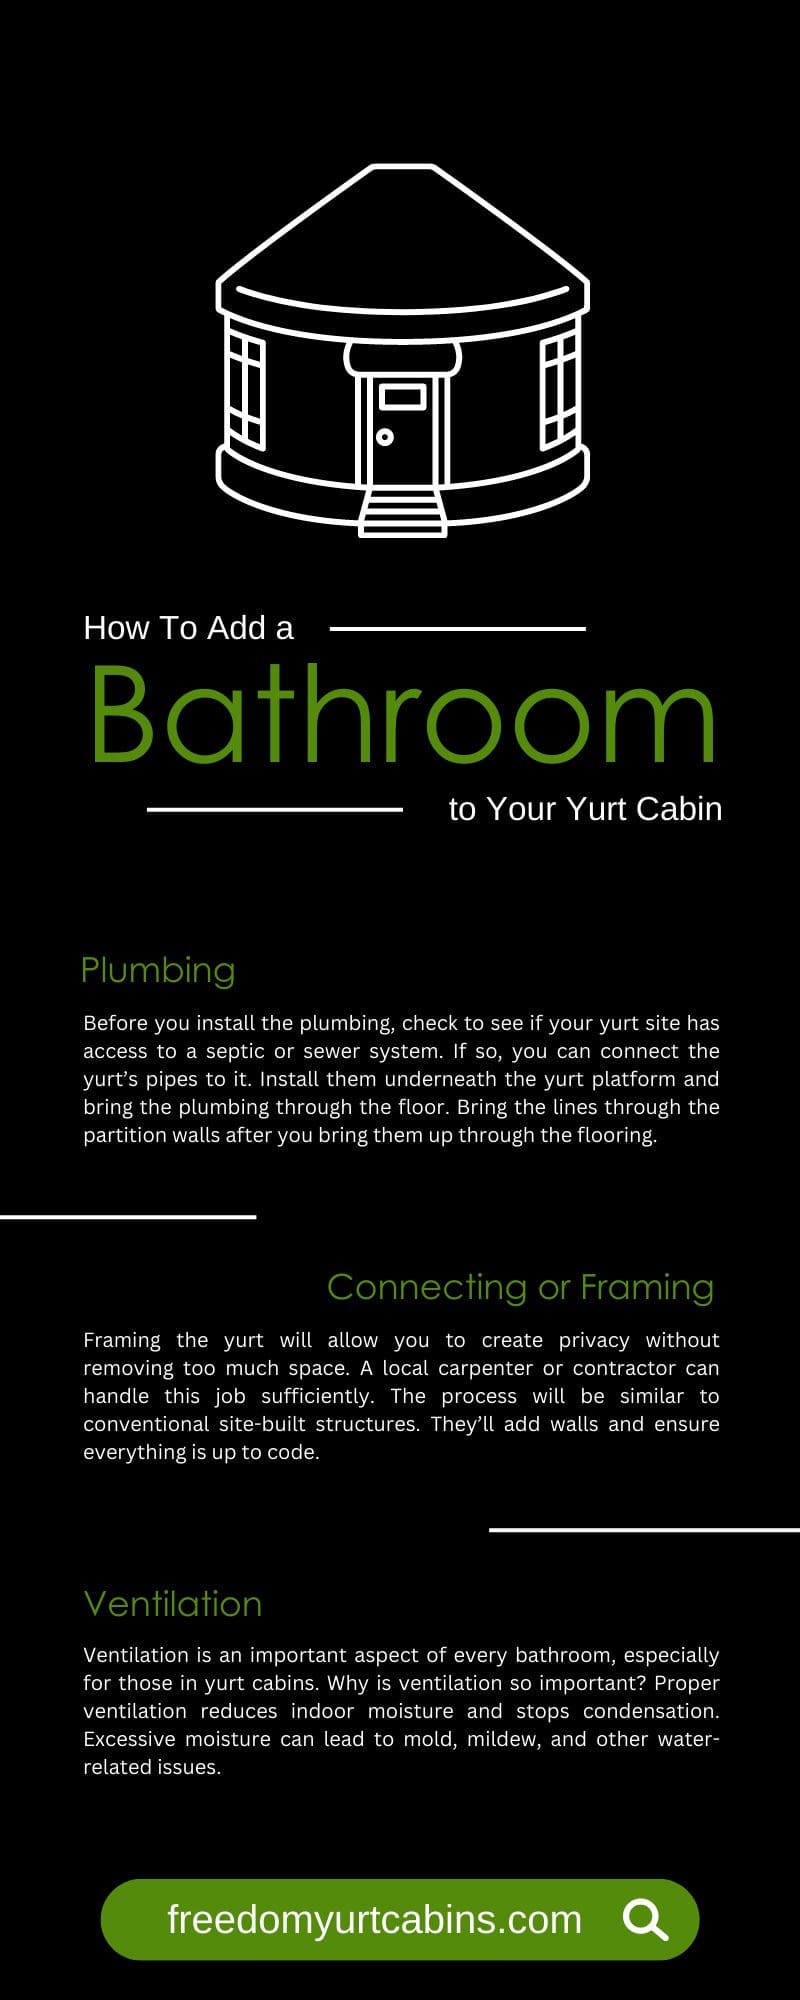 How To Add a Bathroom to Your Yurt Cabin